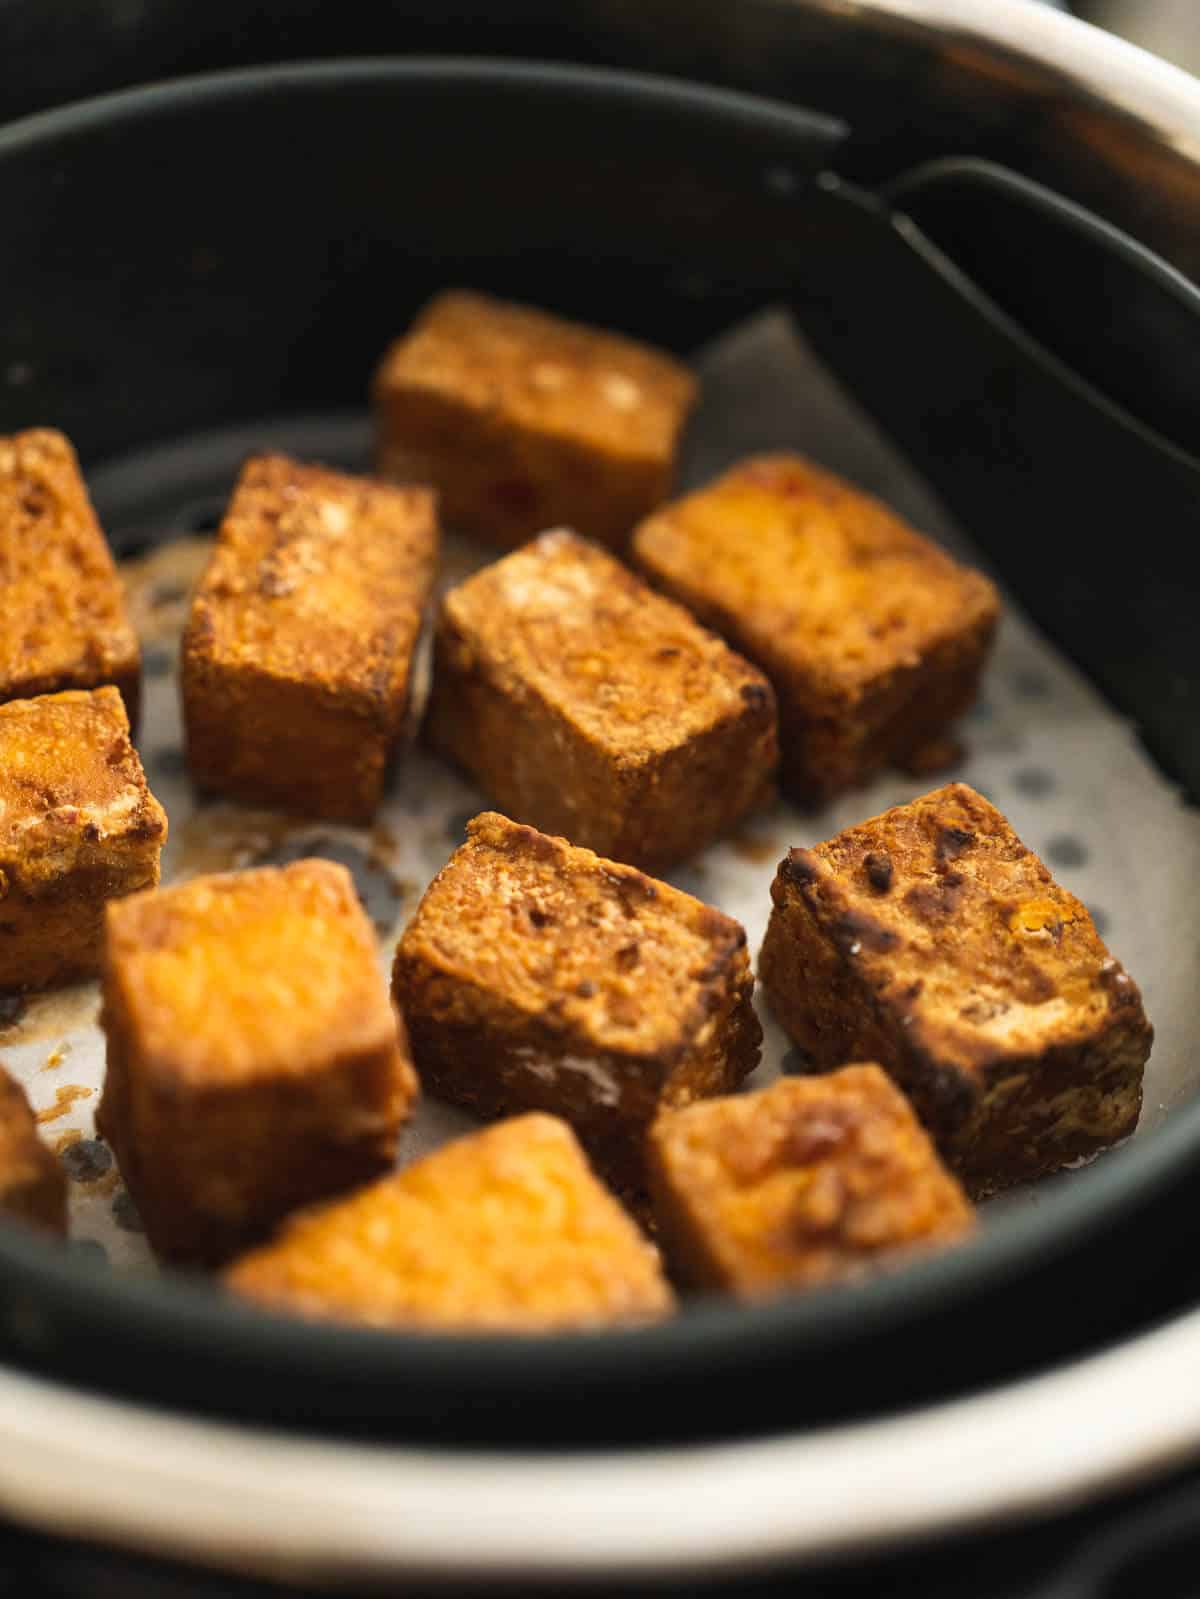 bake the tofu puffs, shaking the basket or carefully moving the tofu with tongs halfway.